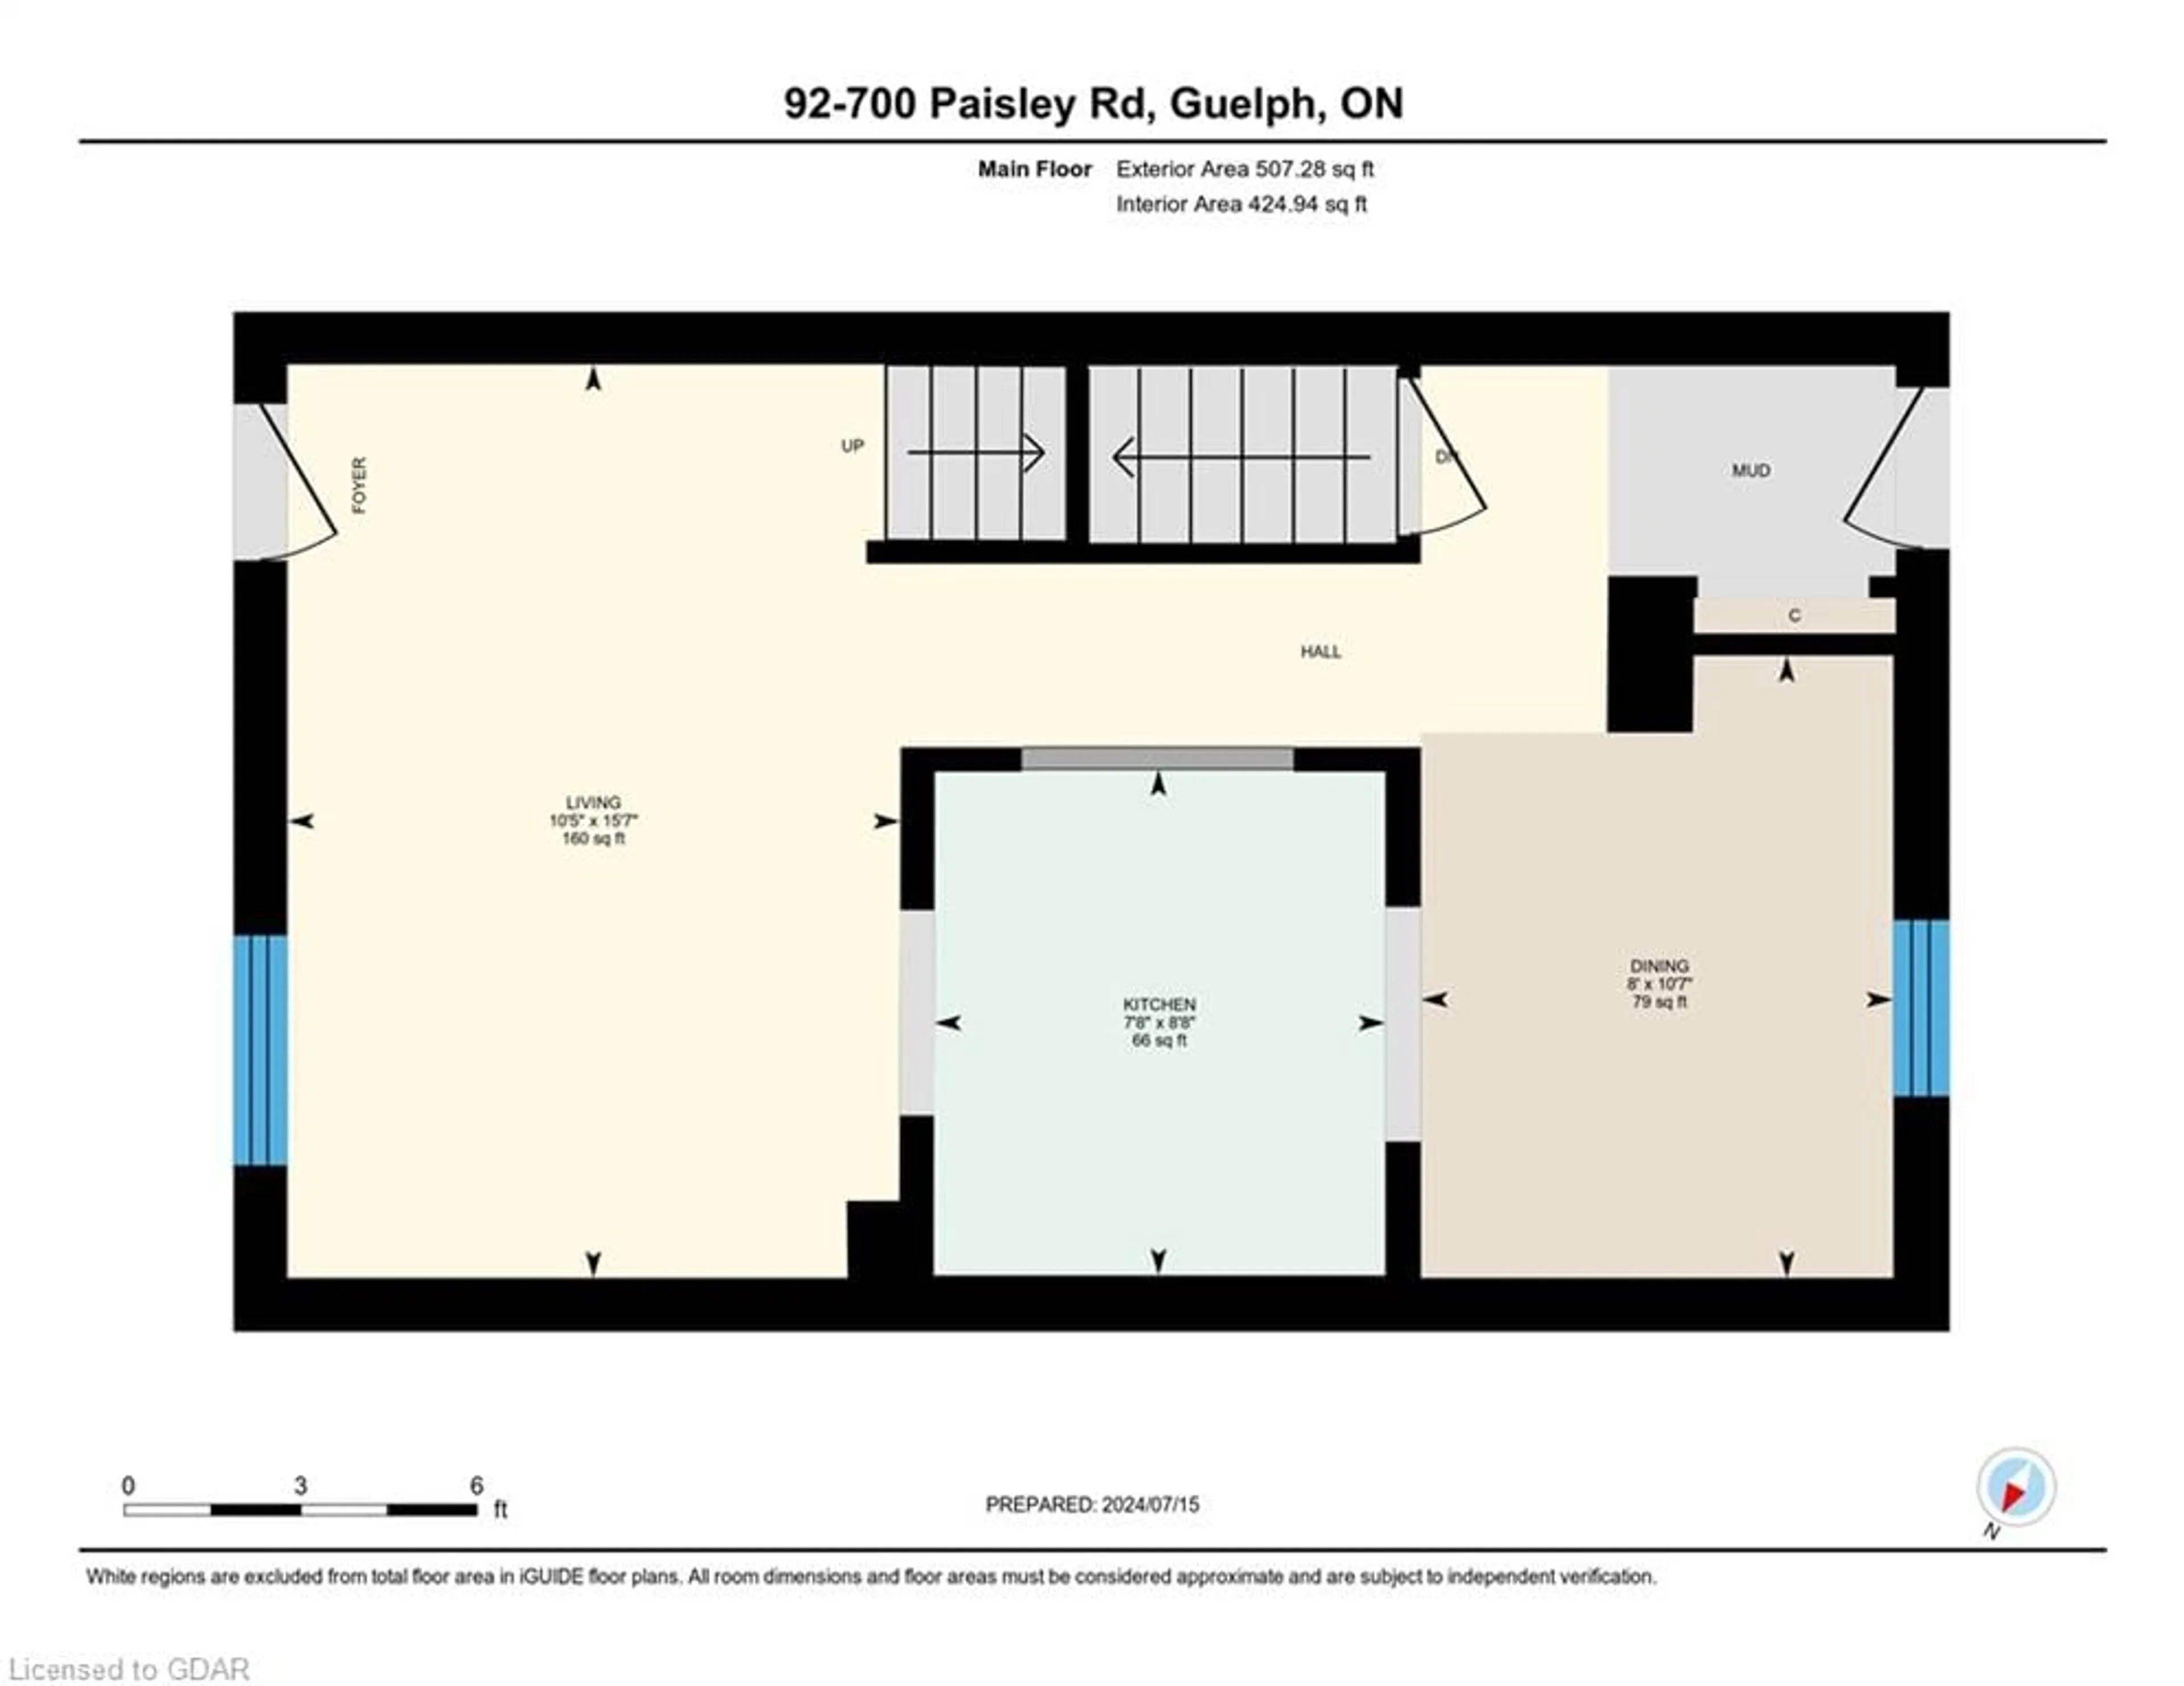 Floor plan for 700 Paisley Rd #92, Guelph Ontario N1K 1A3